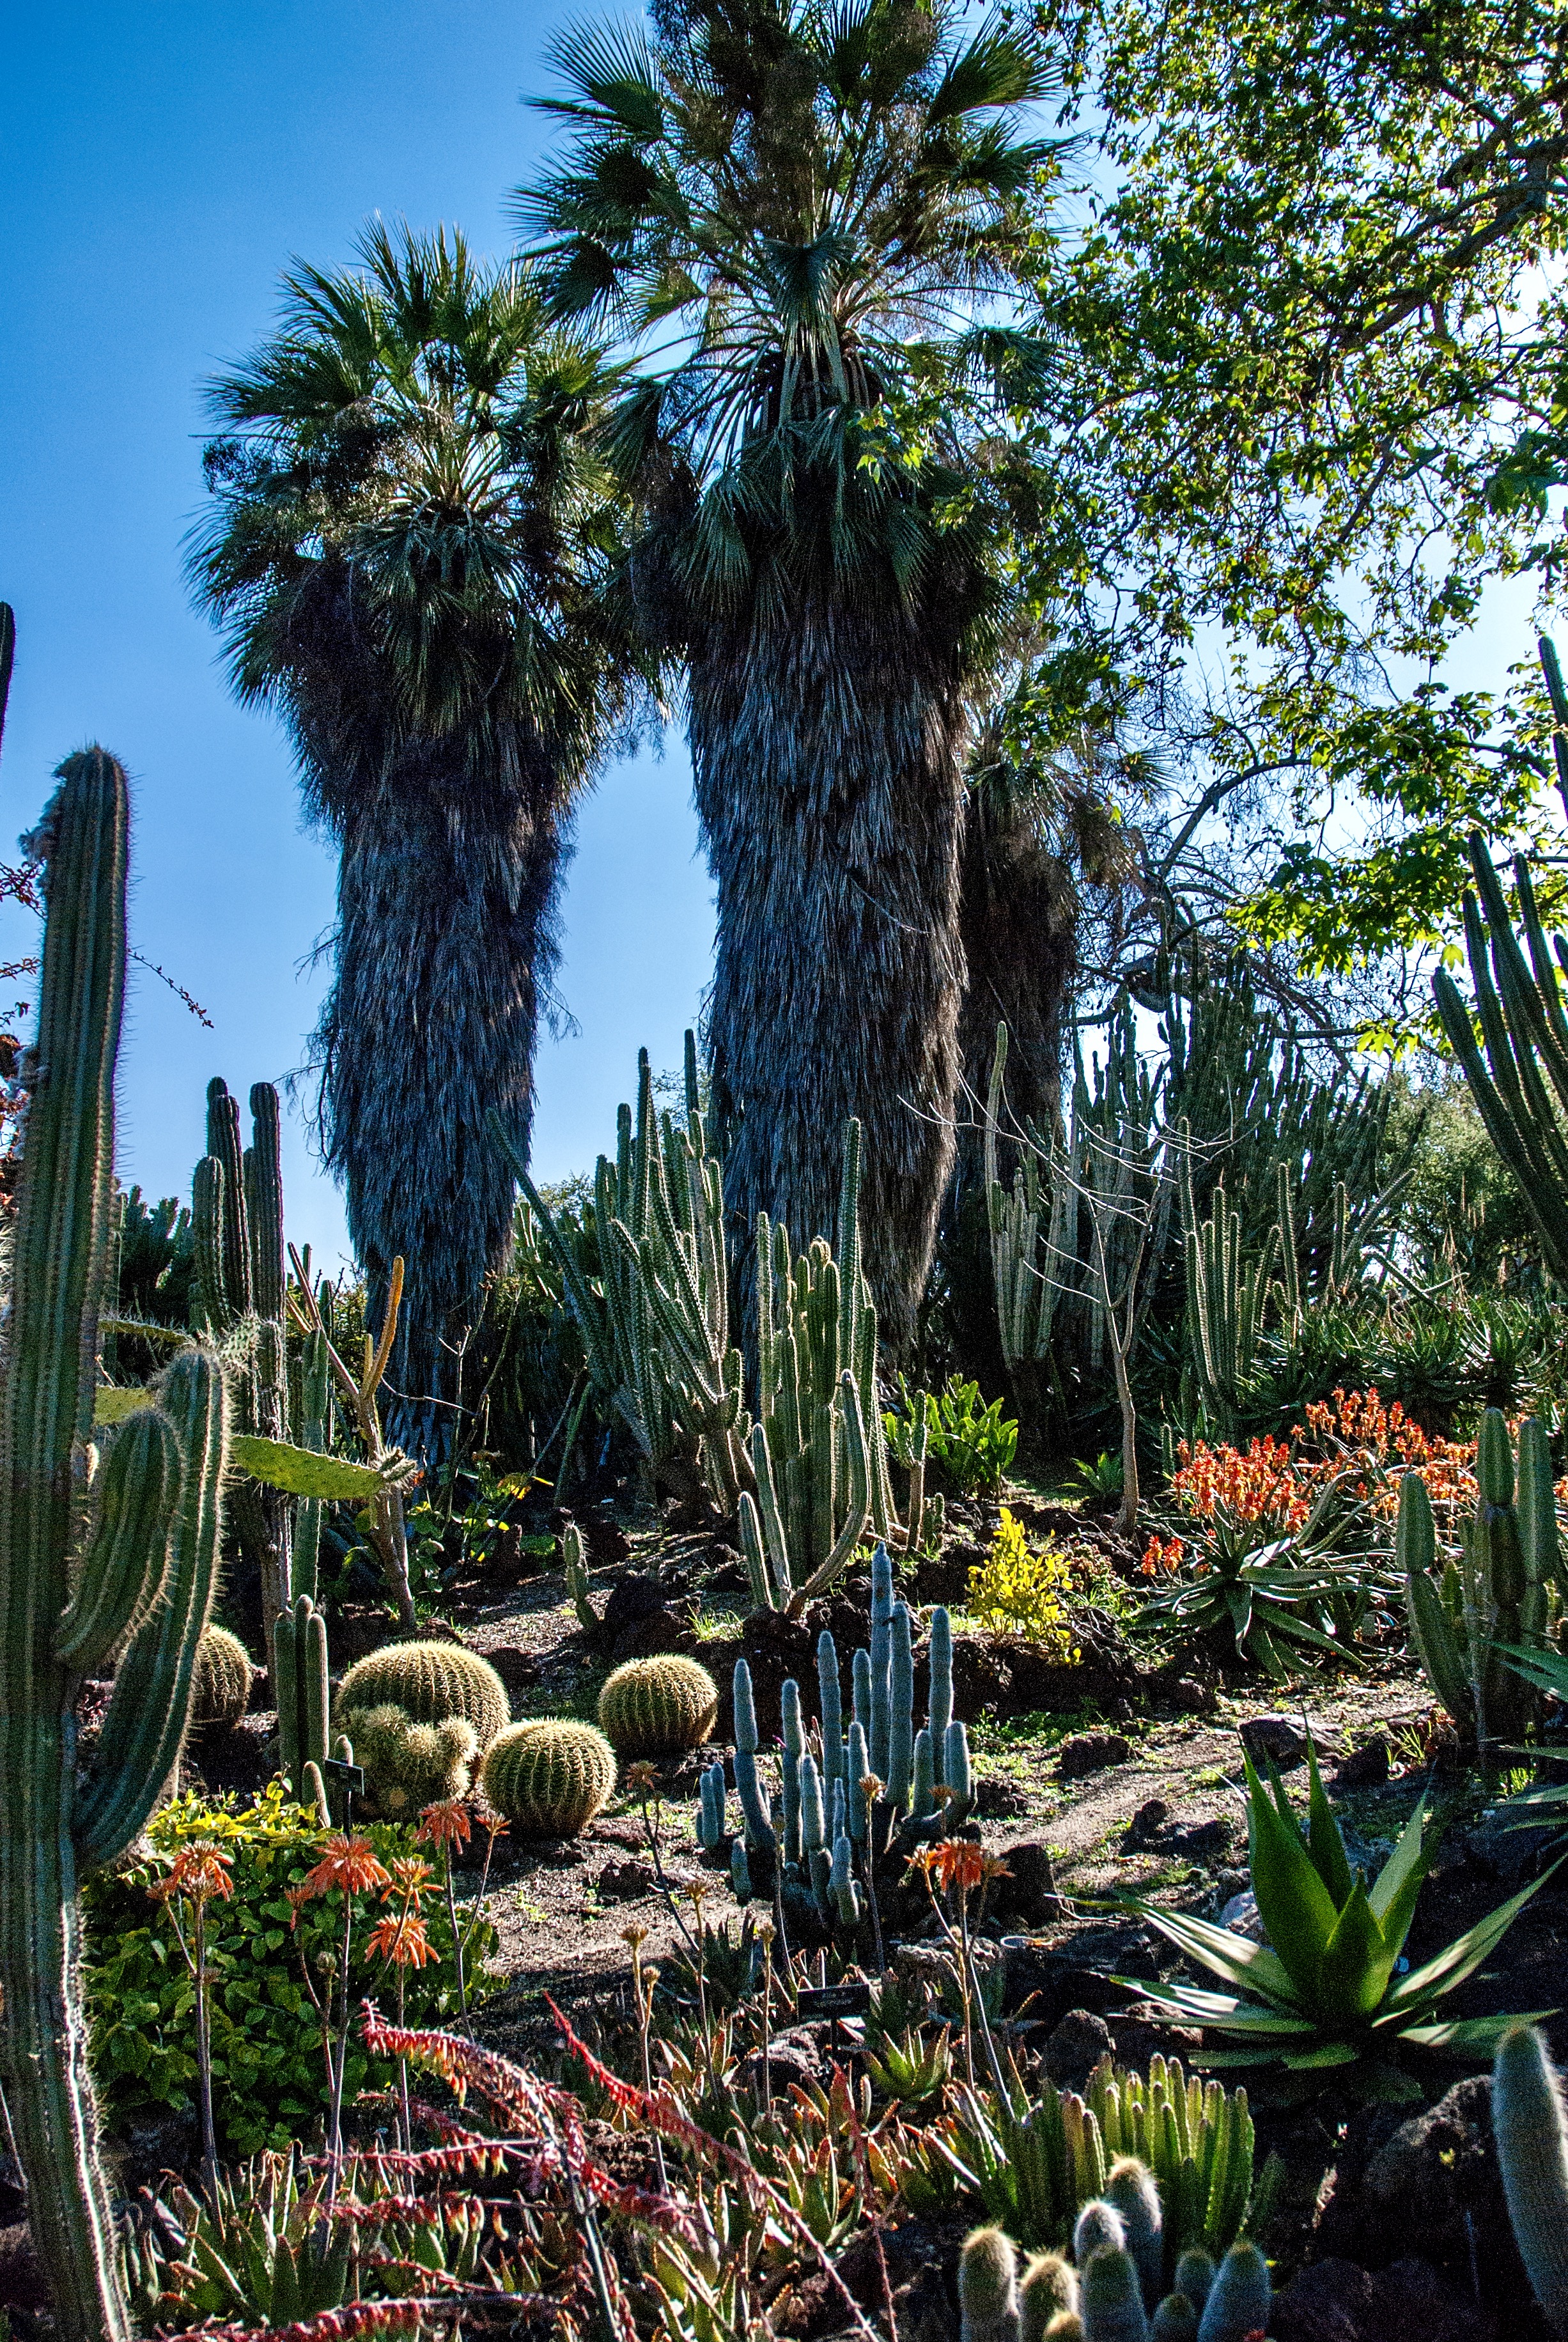 The desert garden section of The Huntington Library full of cacti and succluents with colorful flowers and a couple towering palms.